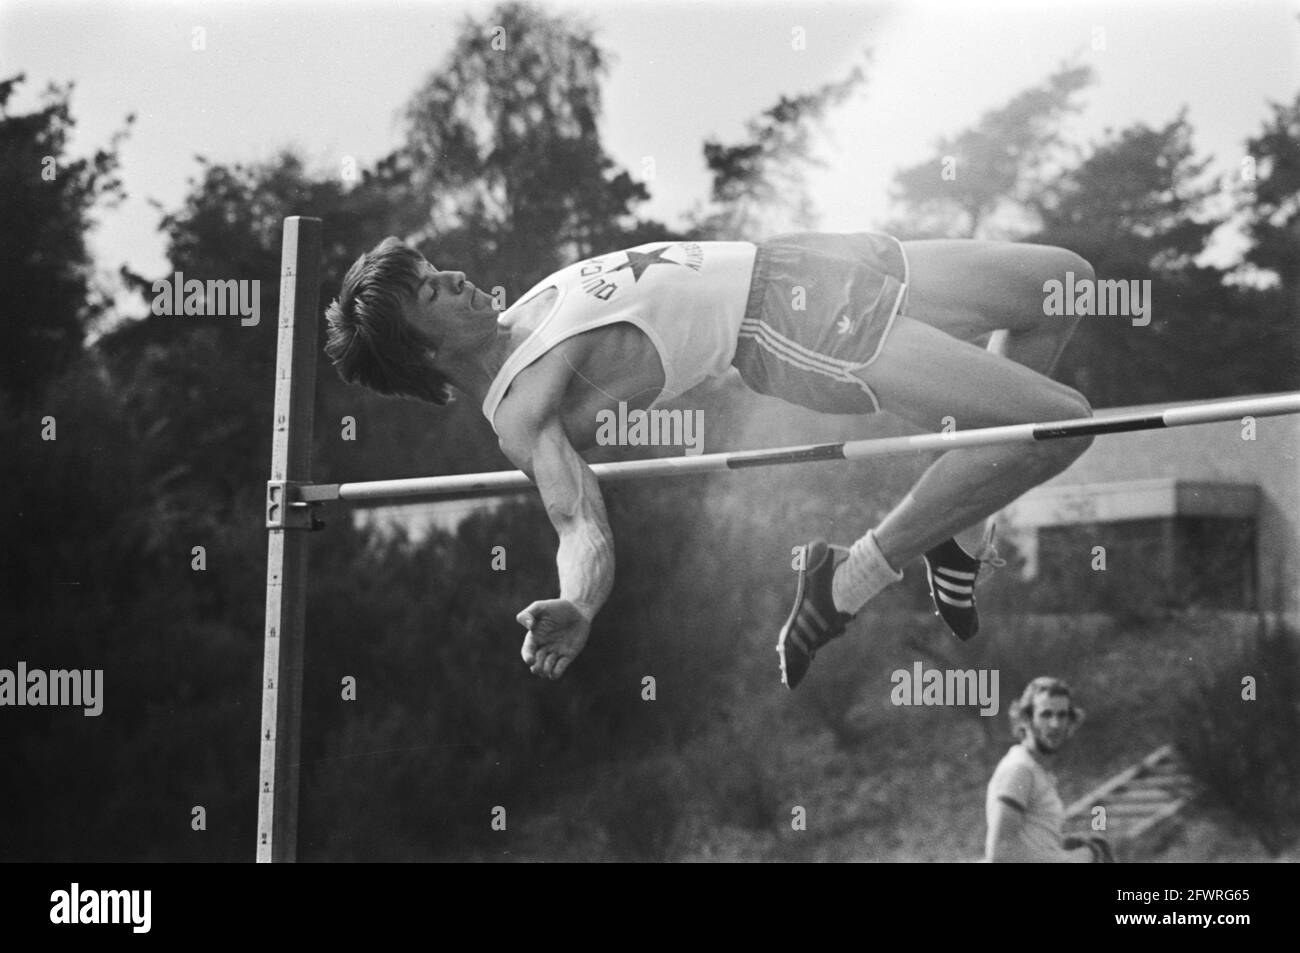 Decathlon Winners High Resolution Stock Photography and Images - Alamy